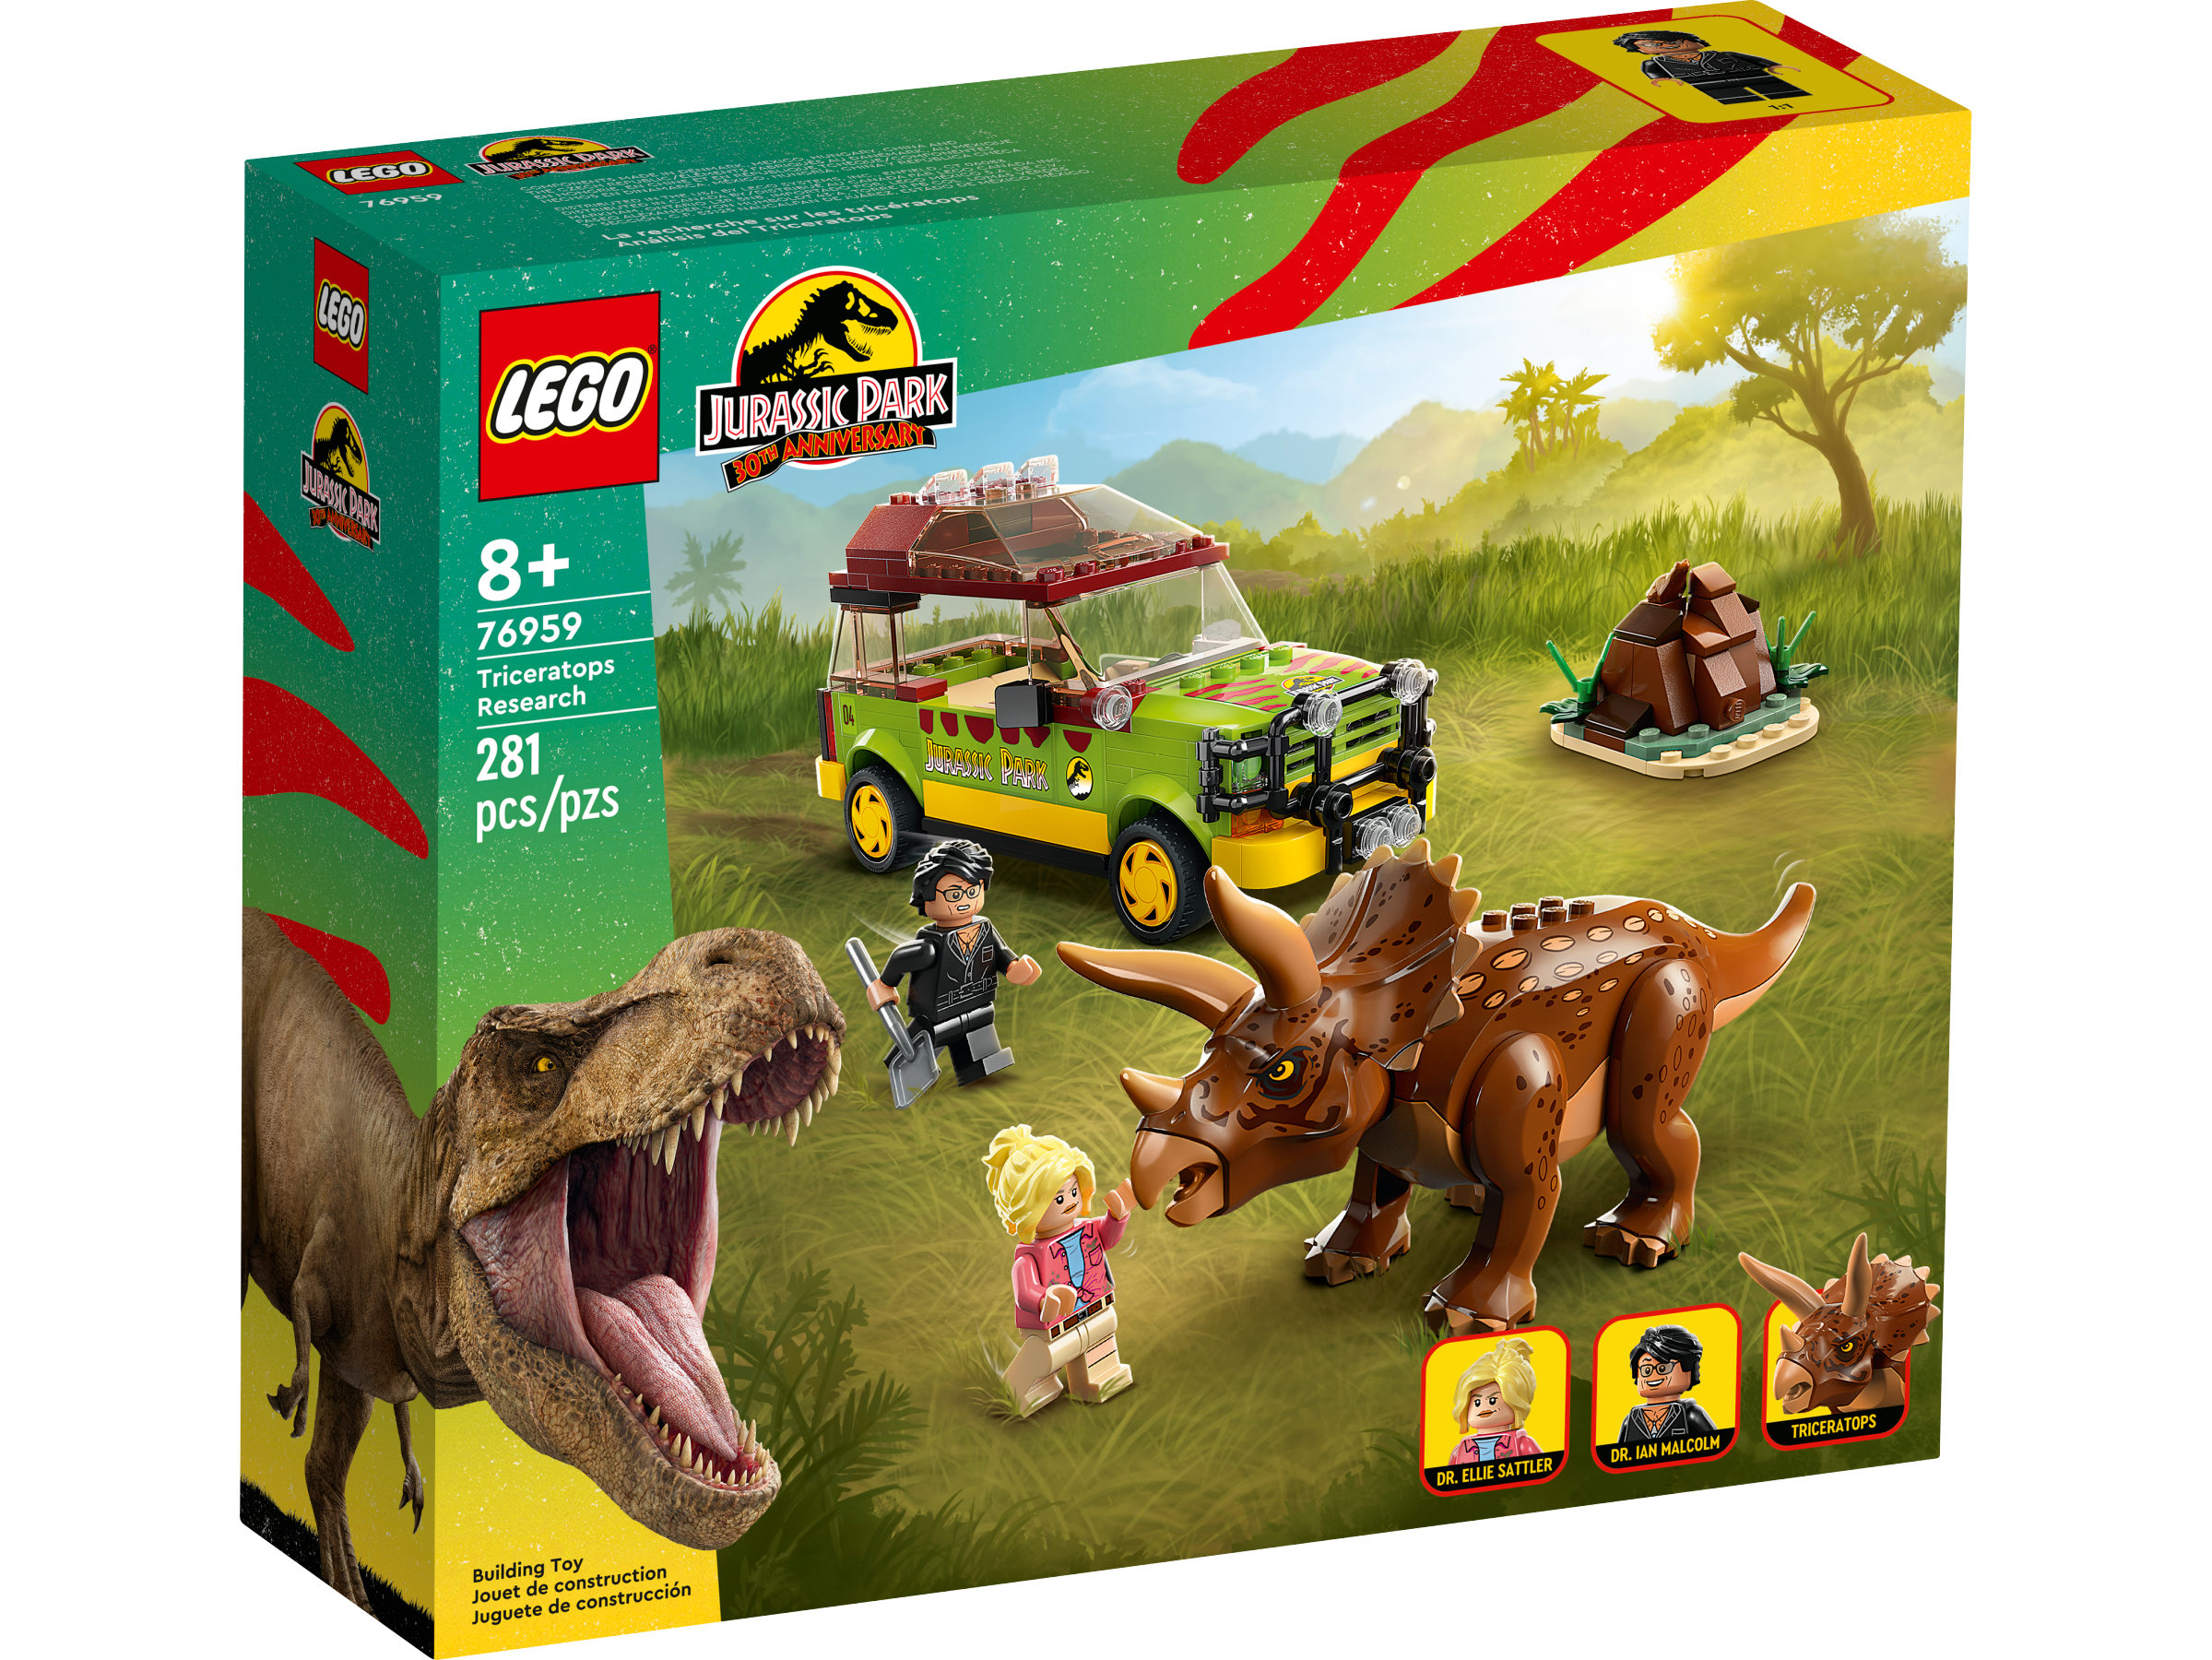 Jurassic World Toys and Gifts Official